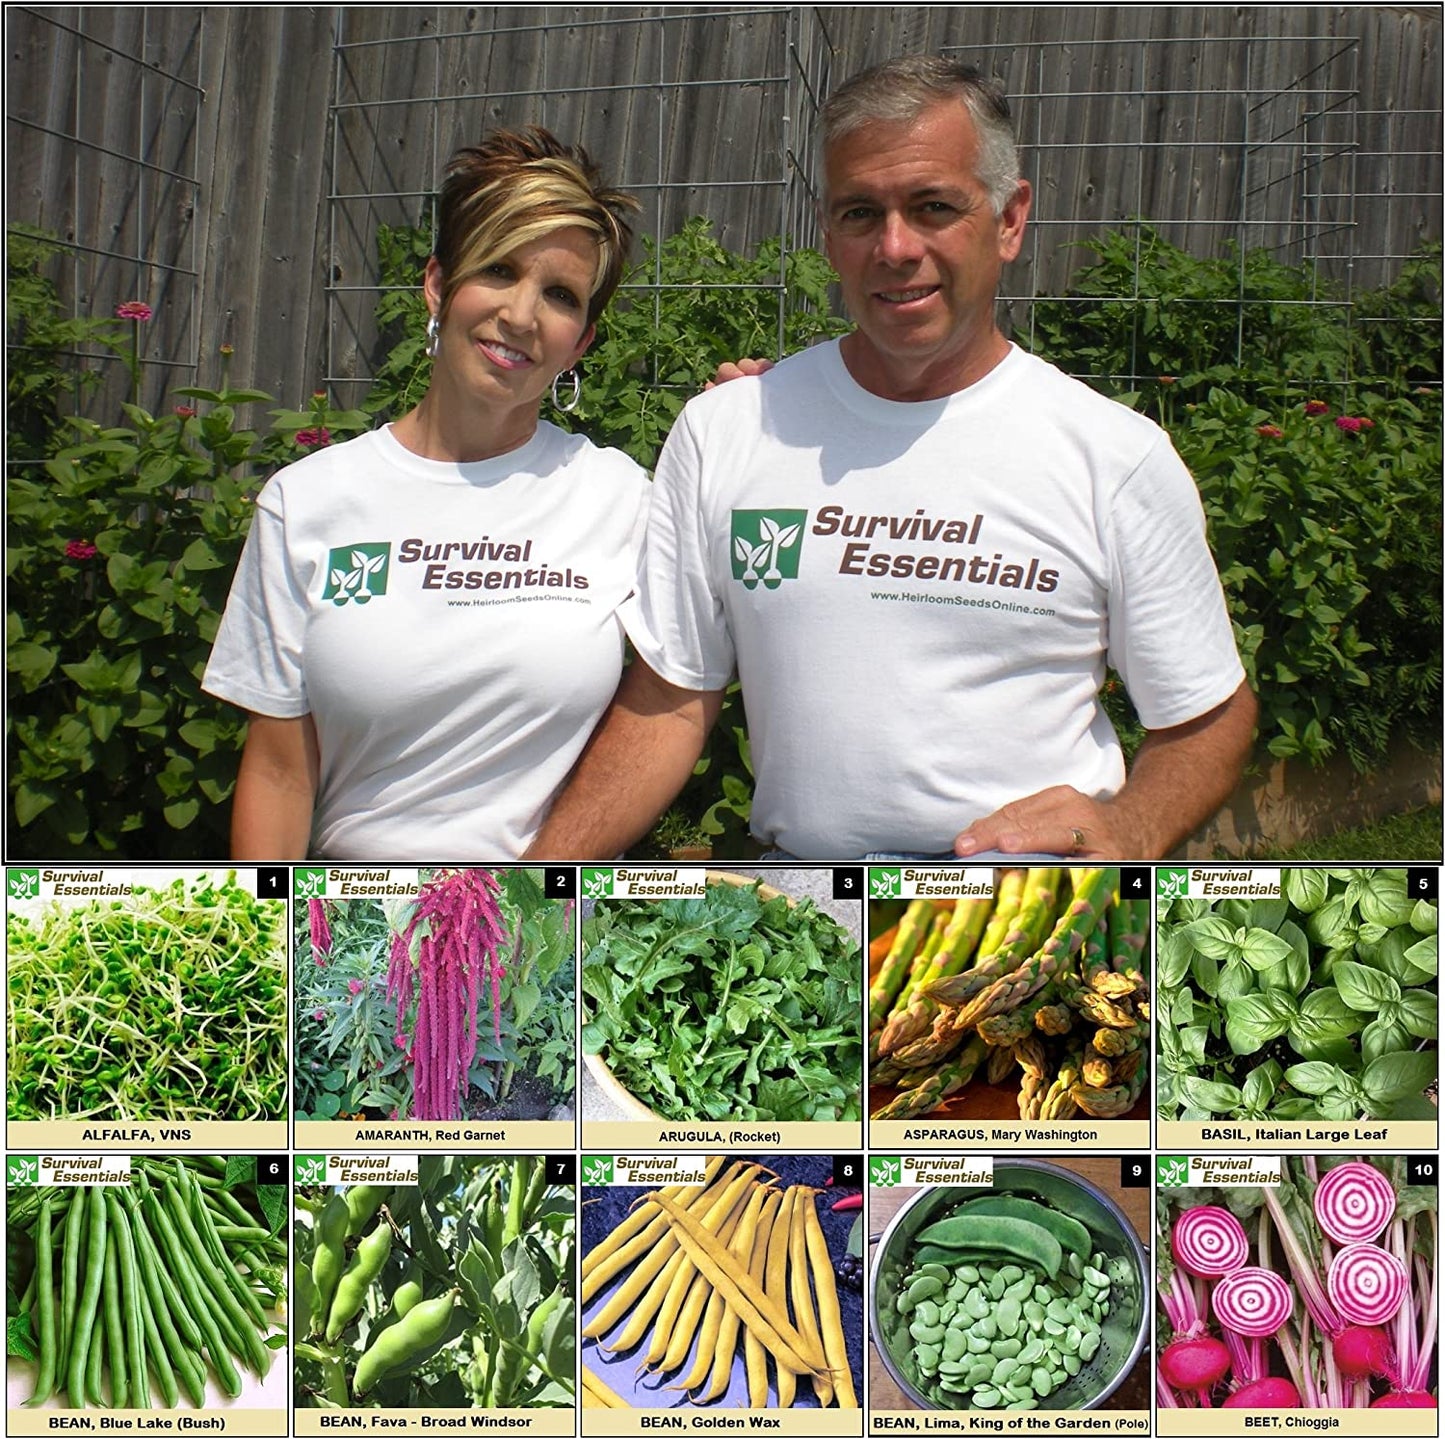 Image showing a man and a woman wearing T-shirts printed with 'Survival Essentials, symbolizing their commitment to preparedness and self-sufficiency, promoting the brand's ethos of resilience and survival readiness